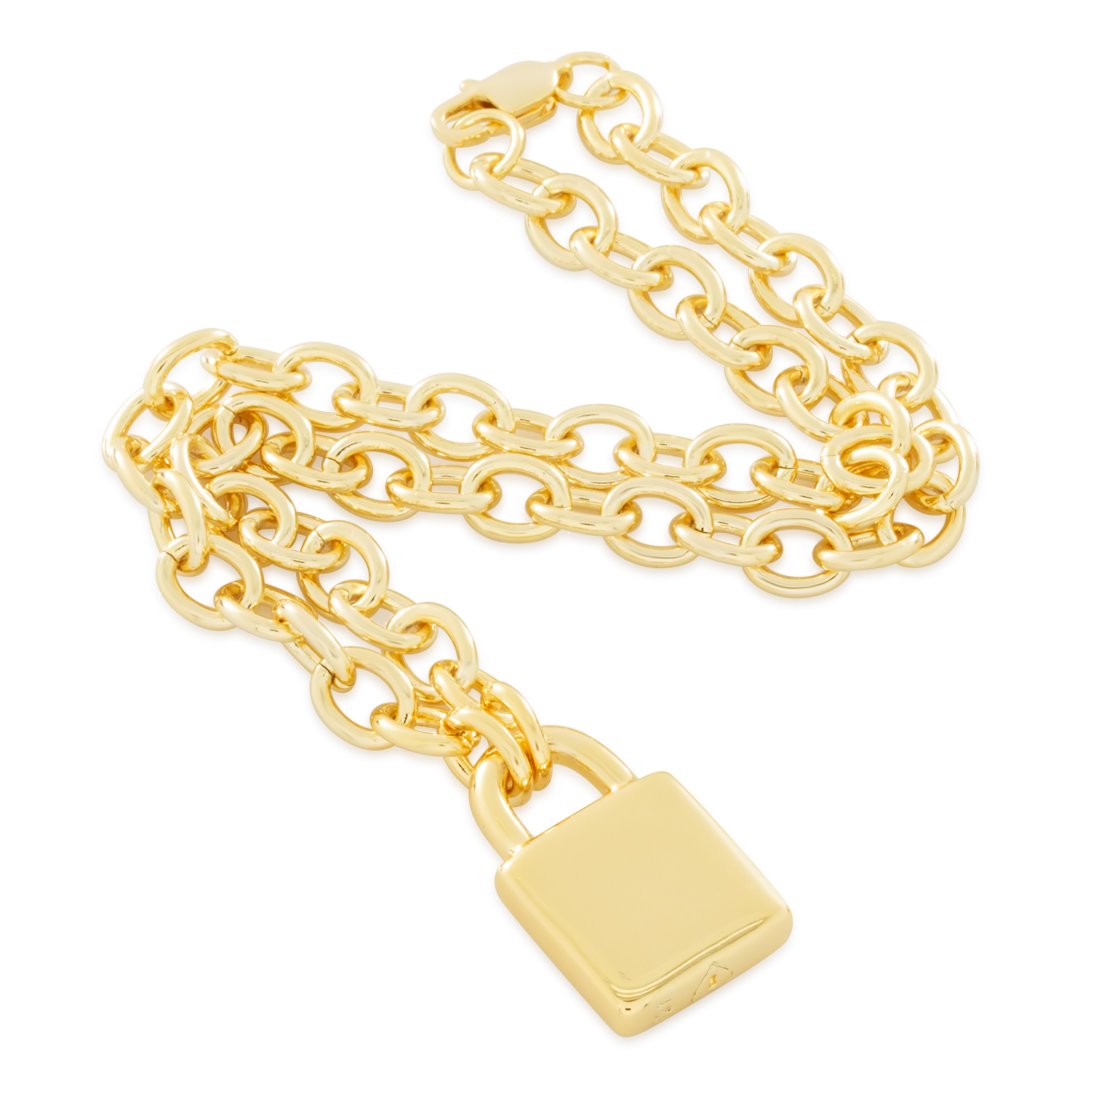 Gold Lock Necklace Gold Padlock Necklace Lock Jewelry -  Hong Kong